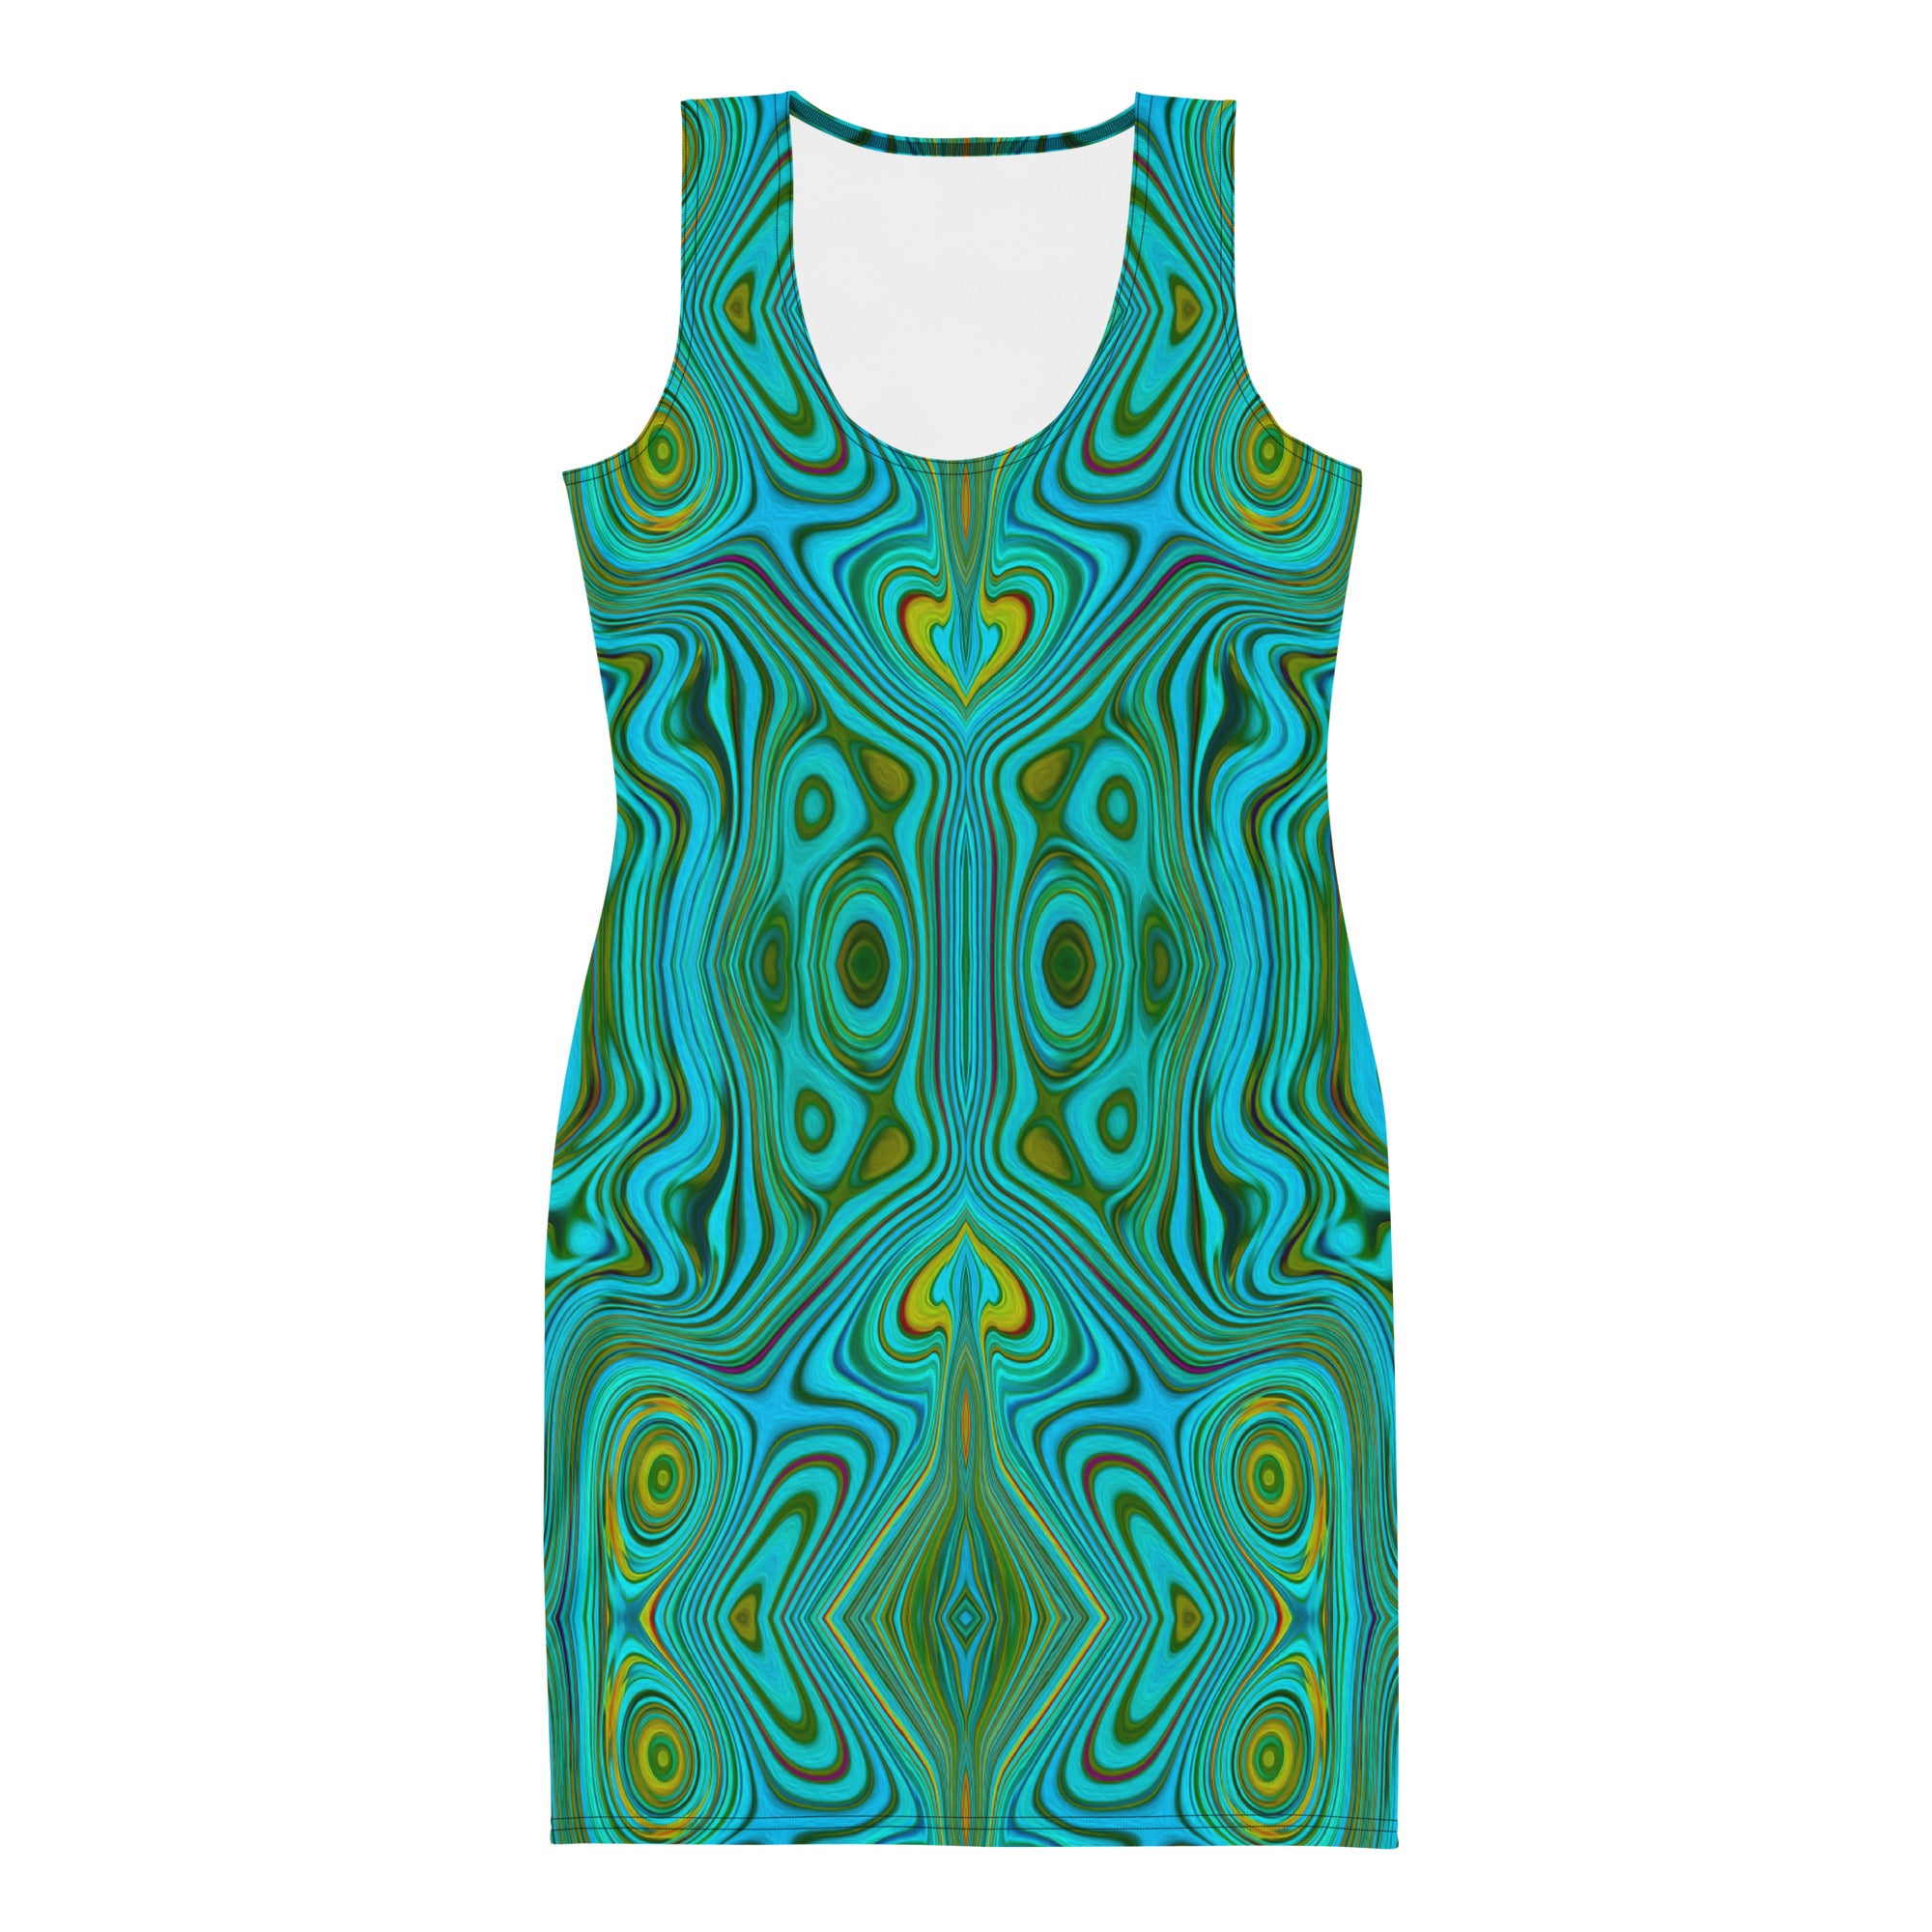 Bodycon Dress, Trippy Retro Turquoise Chartreuse Abstract Pattern